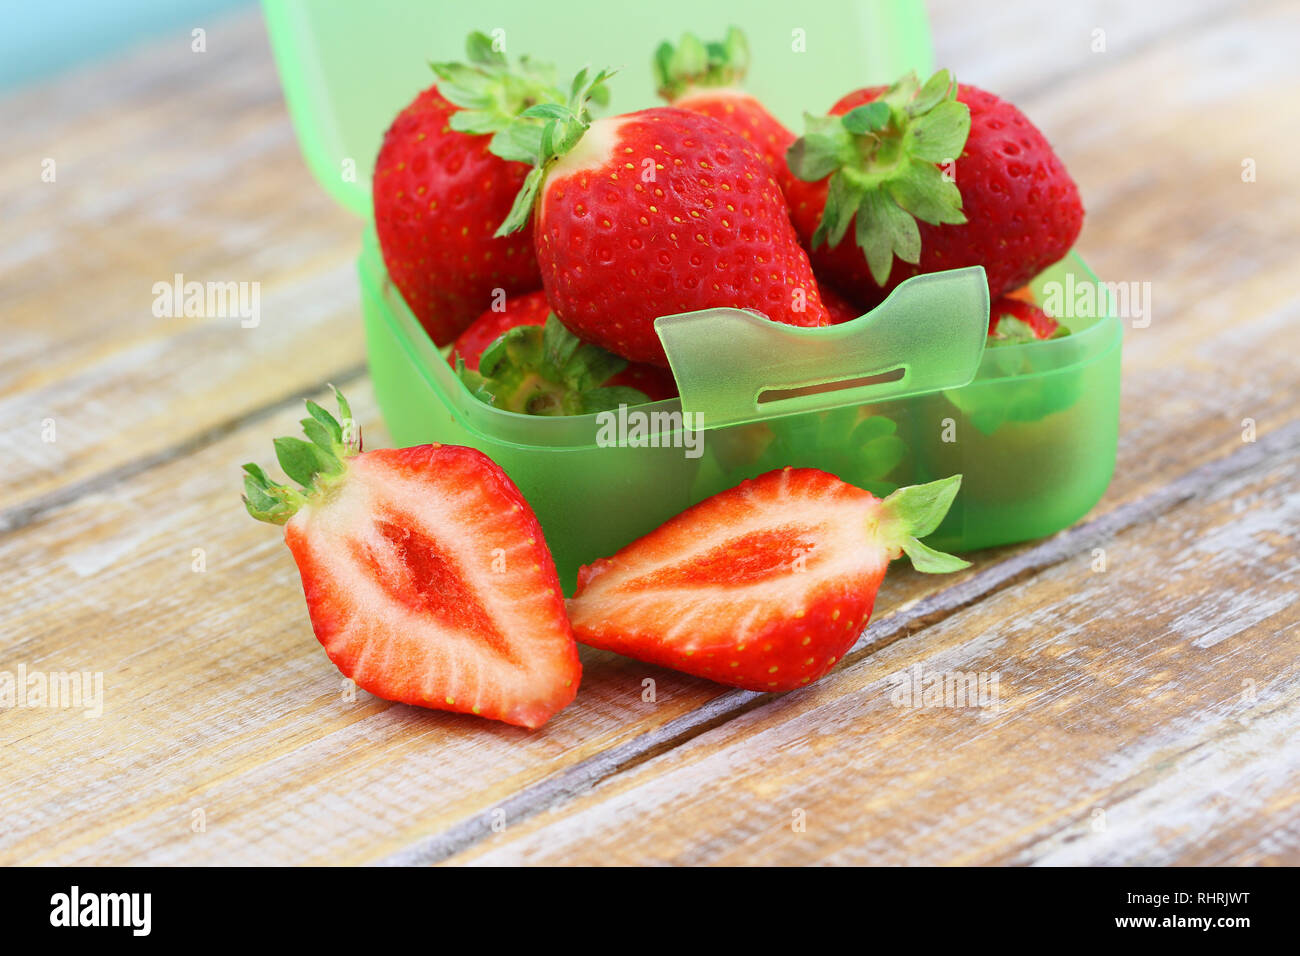 Cross section of a strawberry with box of strawberries in the background Stock Photo